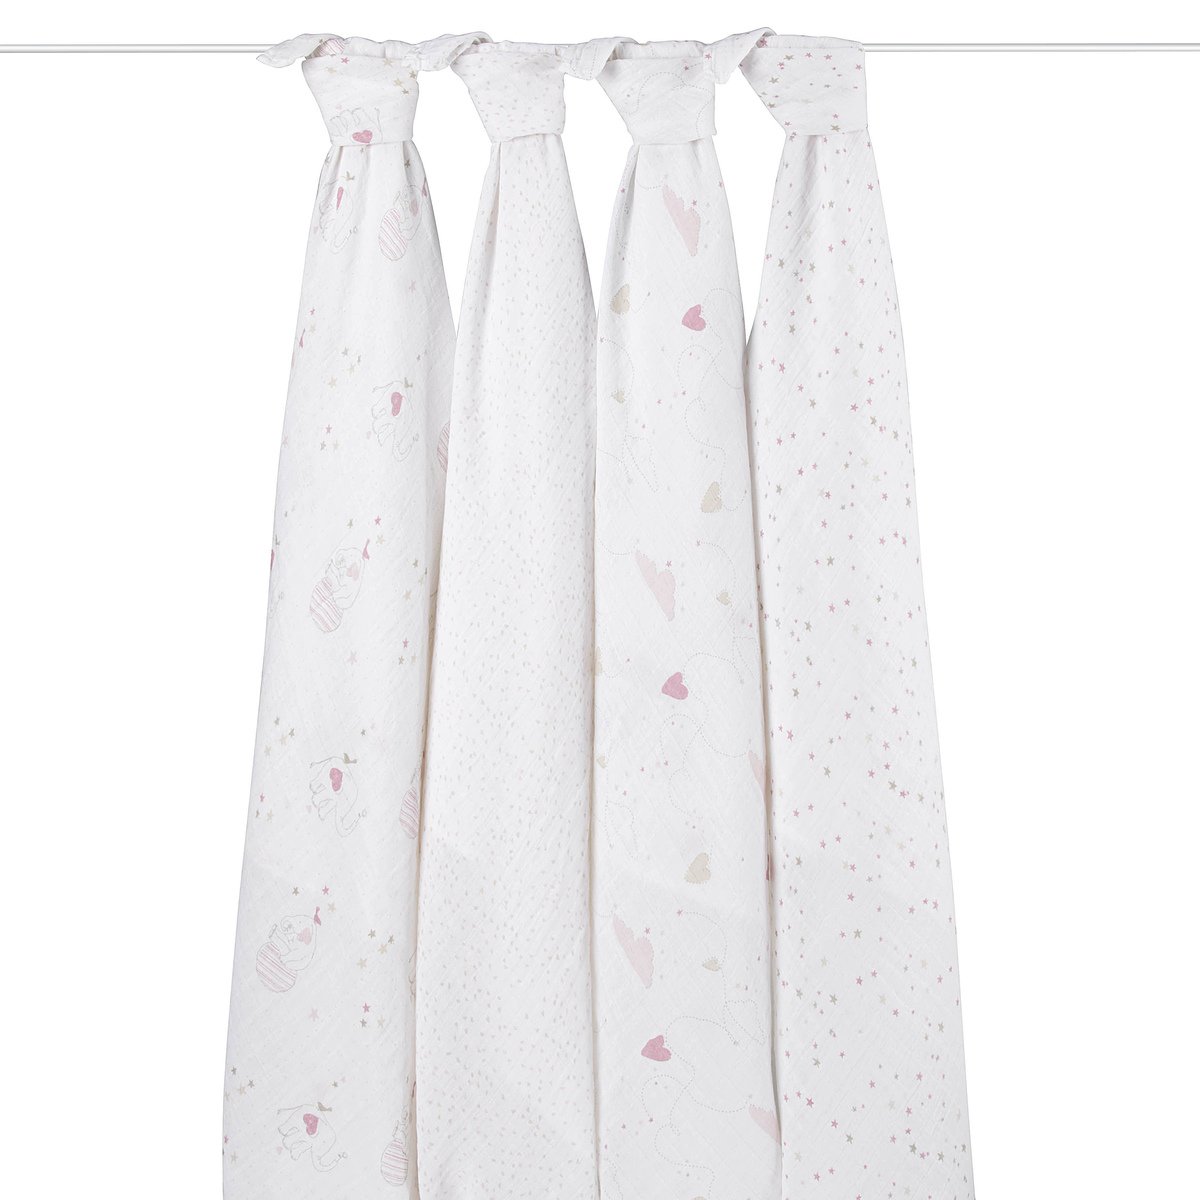 aden + anais Classic Swaddle 2042G Lovely Pack of 4